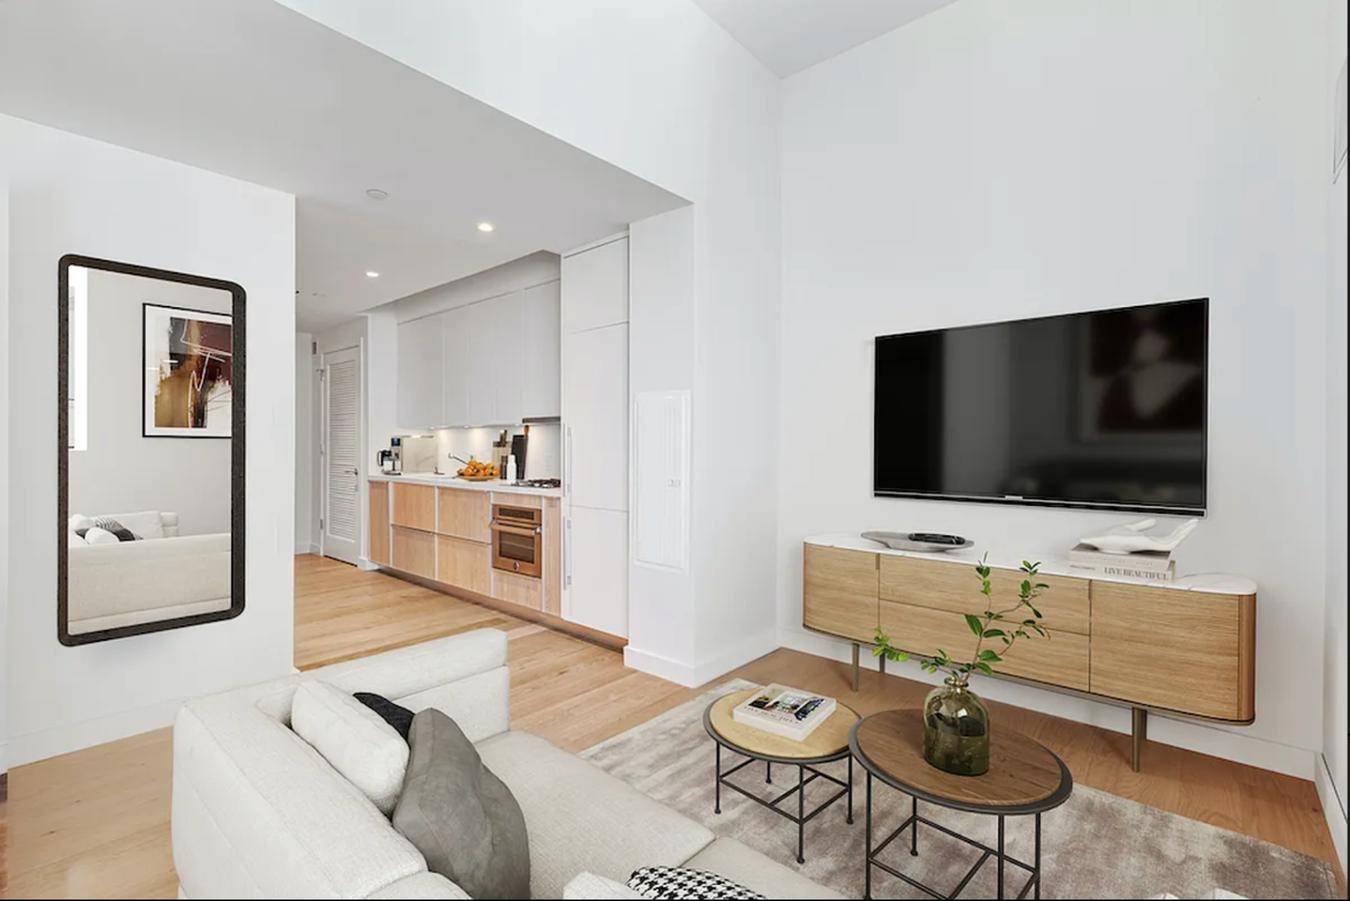 Gorgeous studio apartment in one of downtown's premiere buildings 19 dutch street.